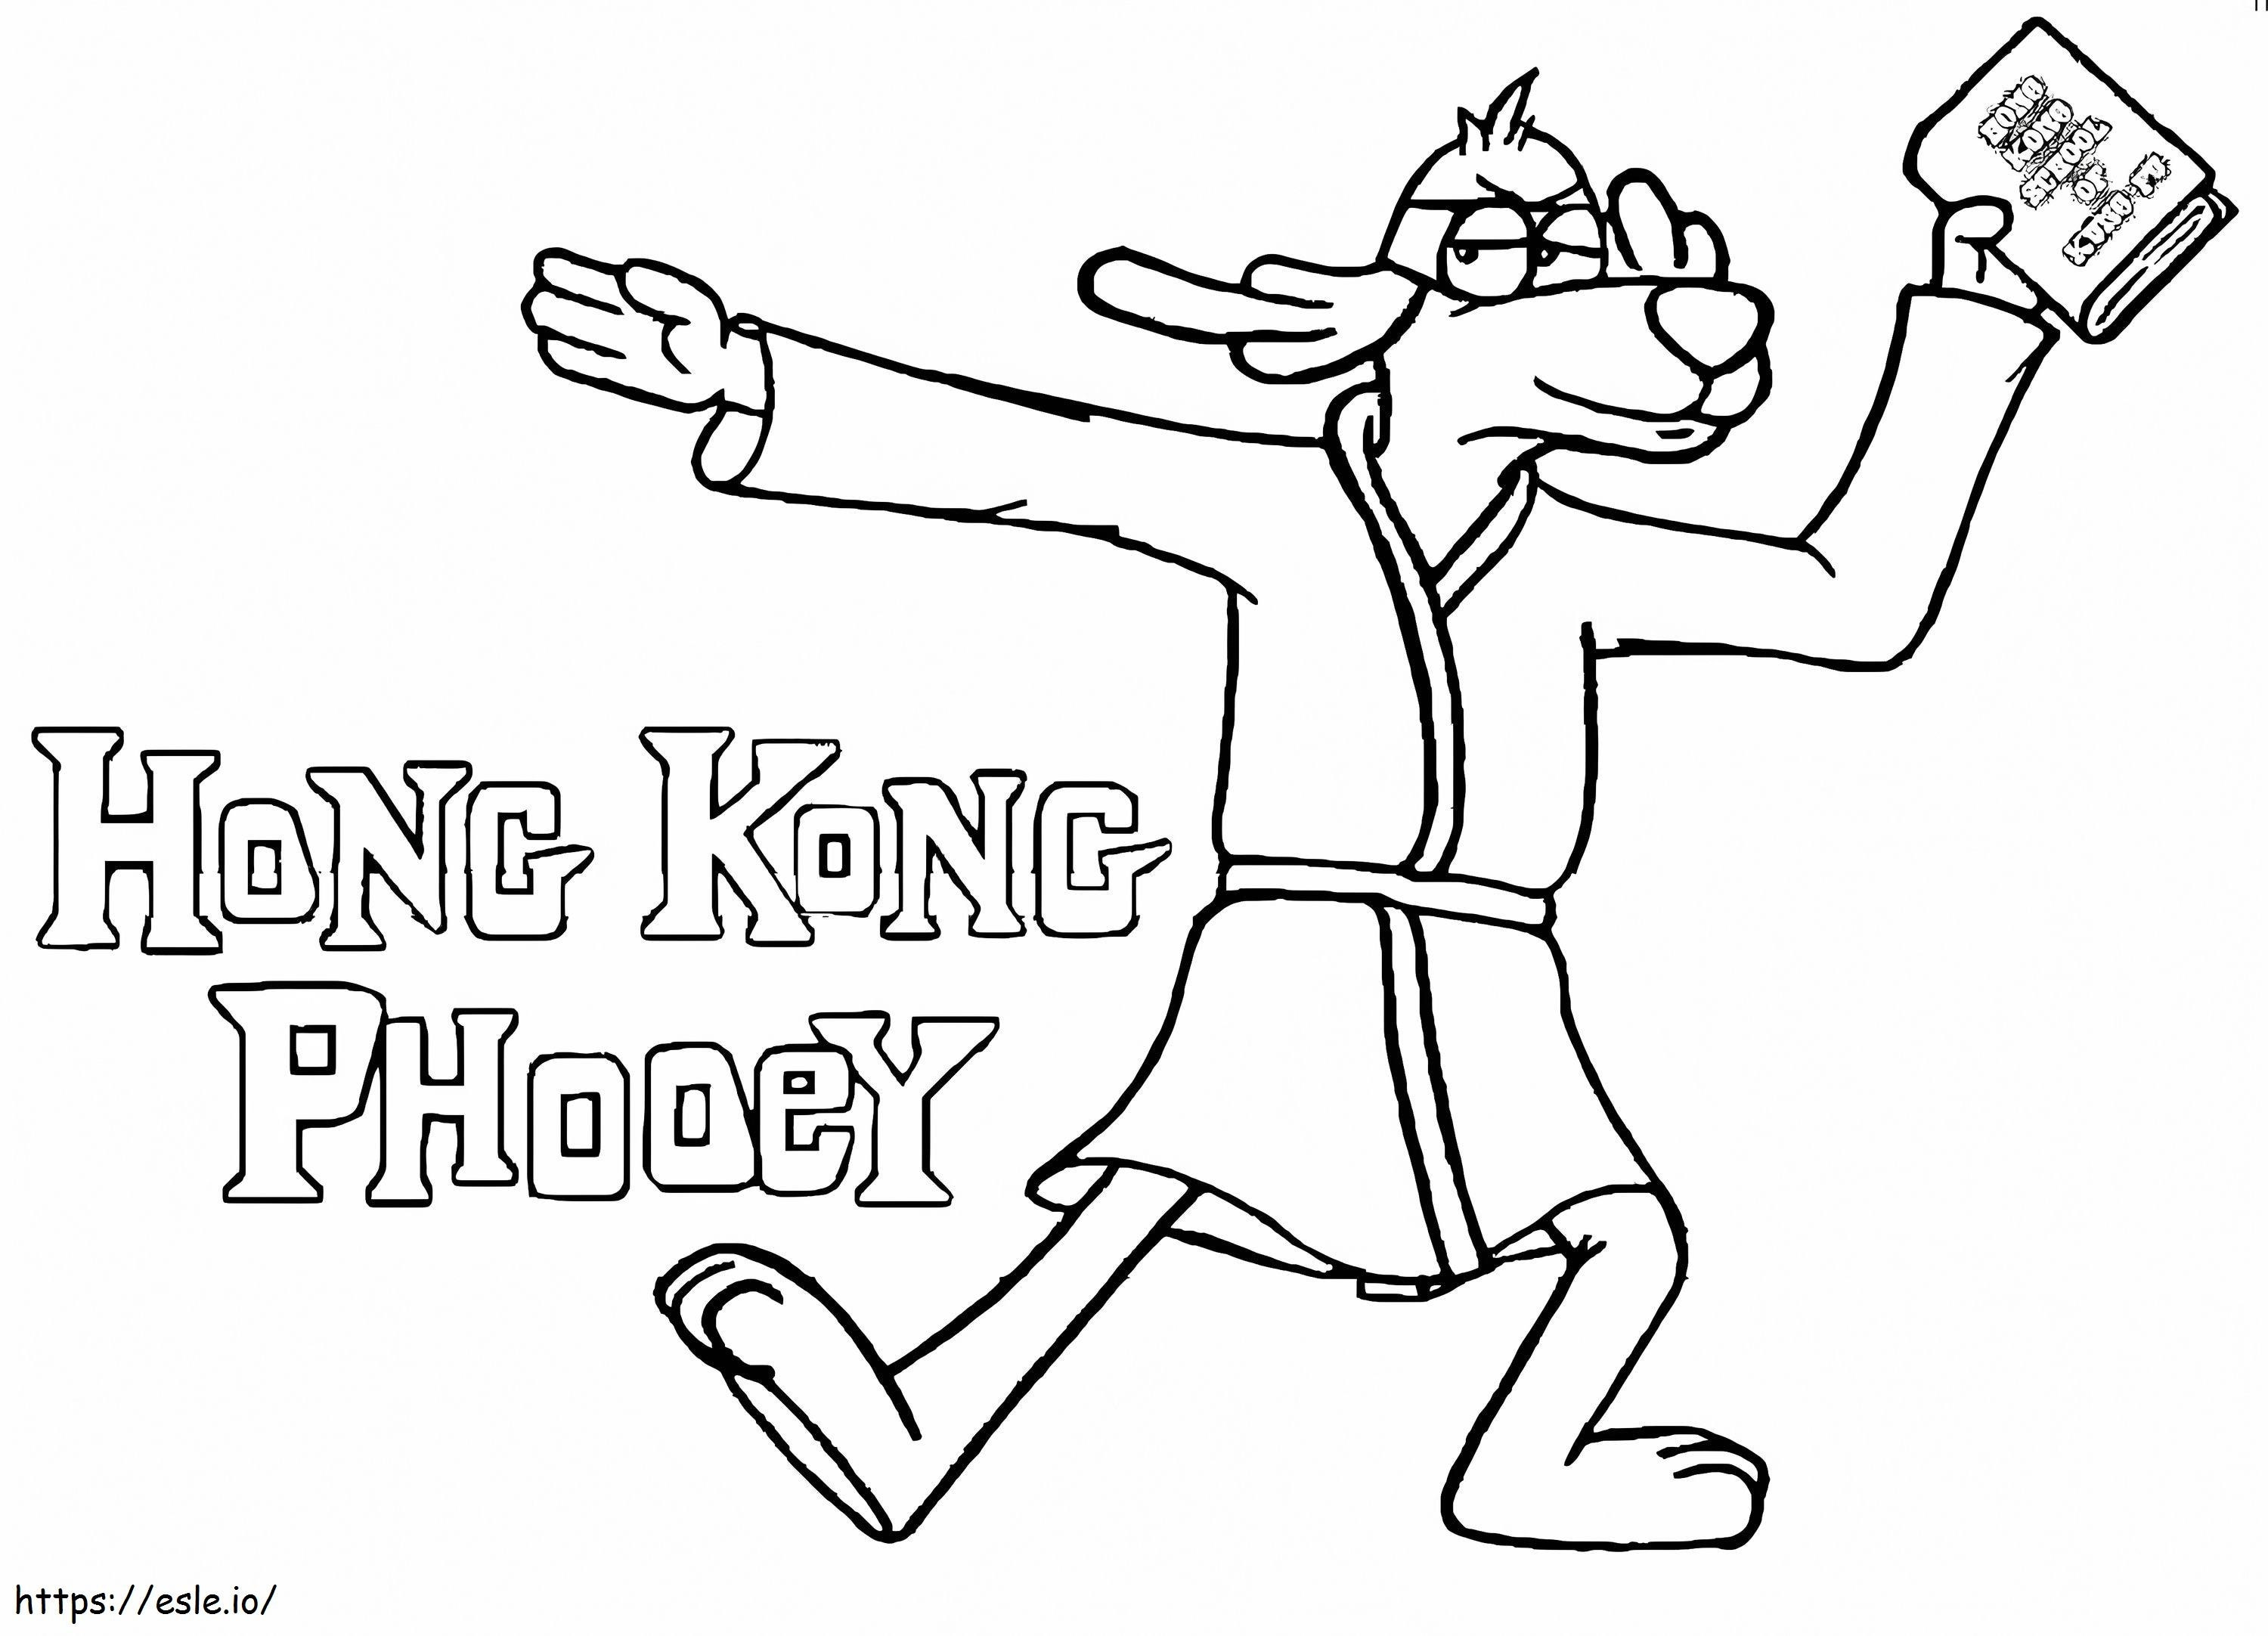 Hong Kong Phooey With A Book coloring page